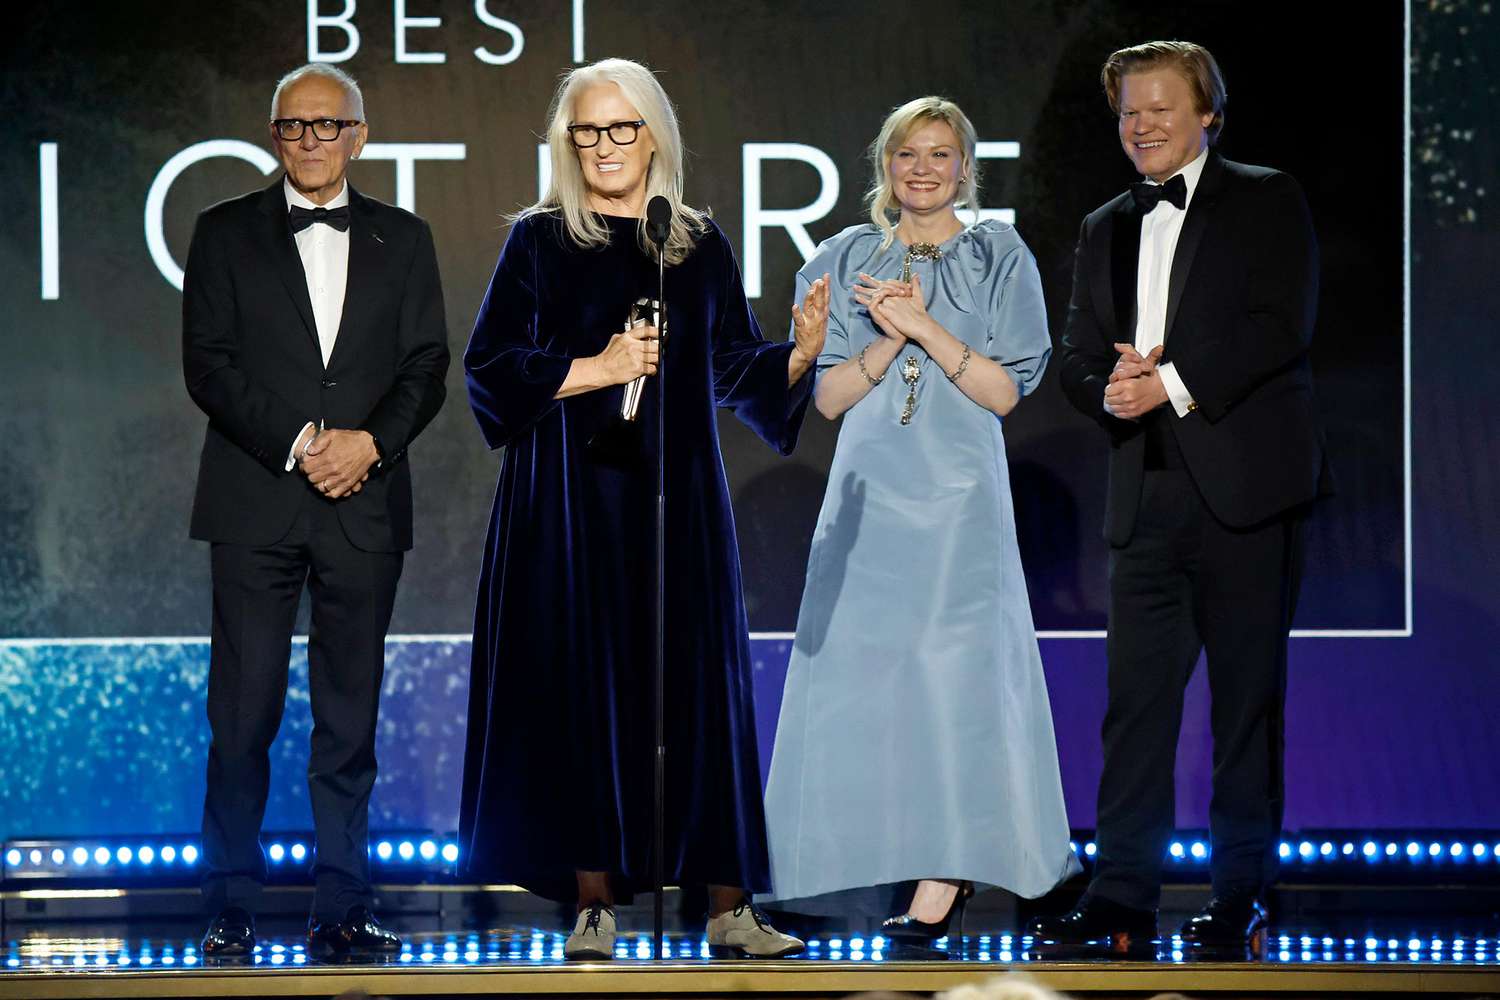 27th Annual Critics Choice Awards Roger Frappier, Jane Campion, Kirsten Dunst, and Jesse Plemons accept the Best Picture award for 'The Power of the Dog'